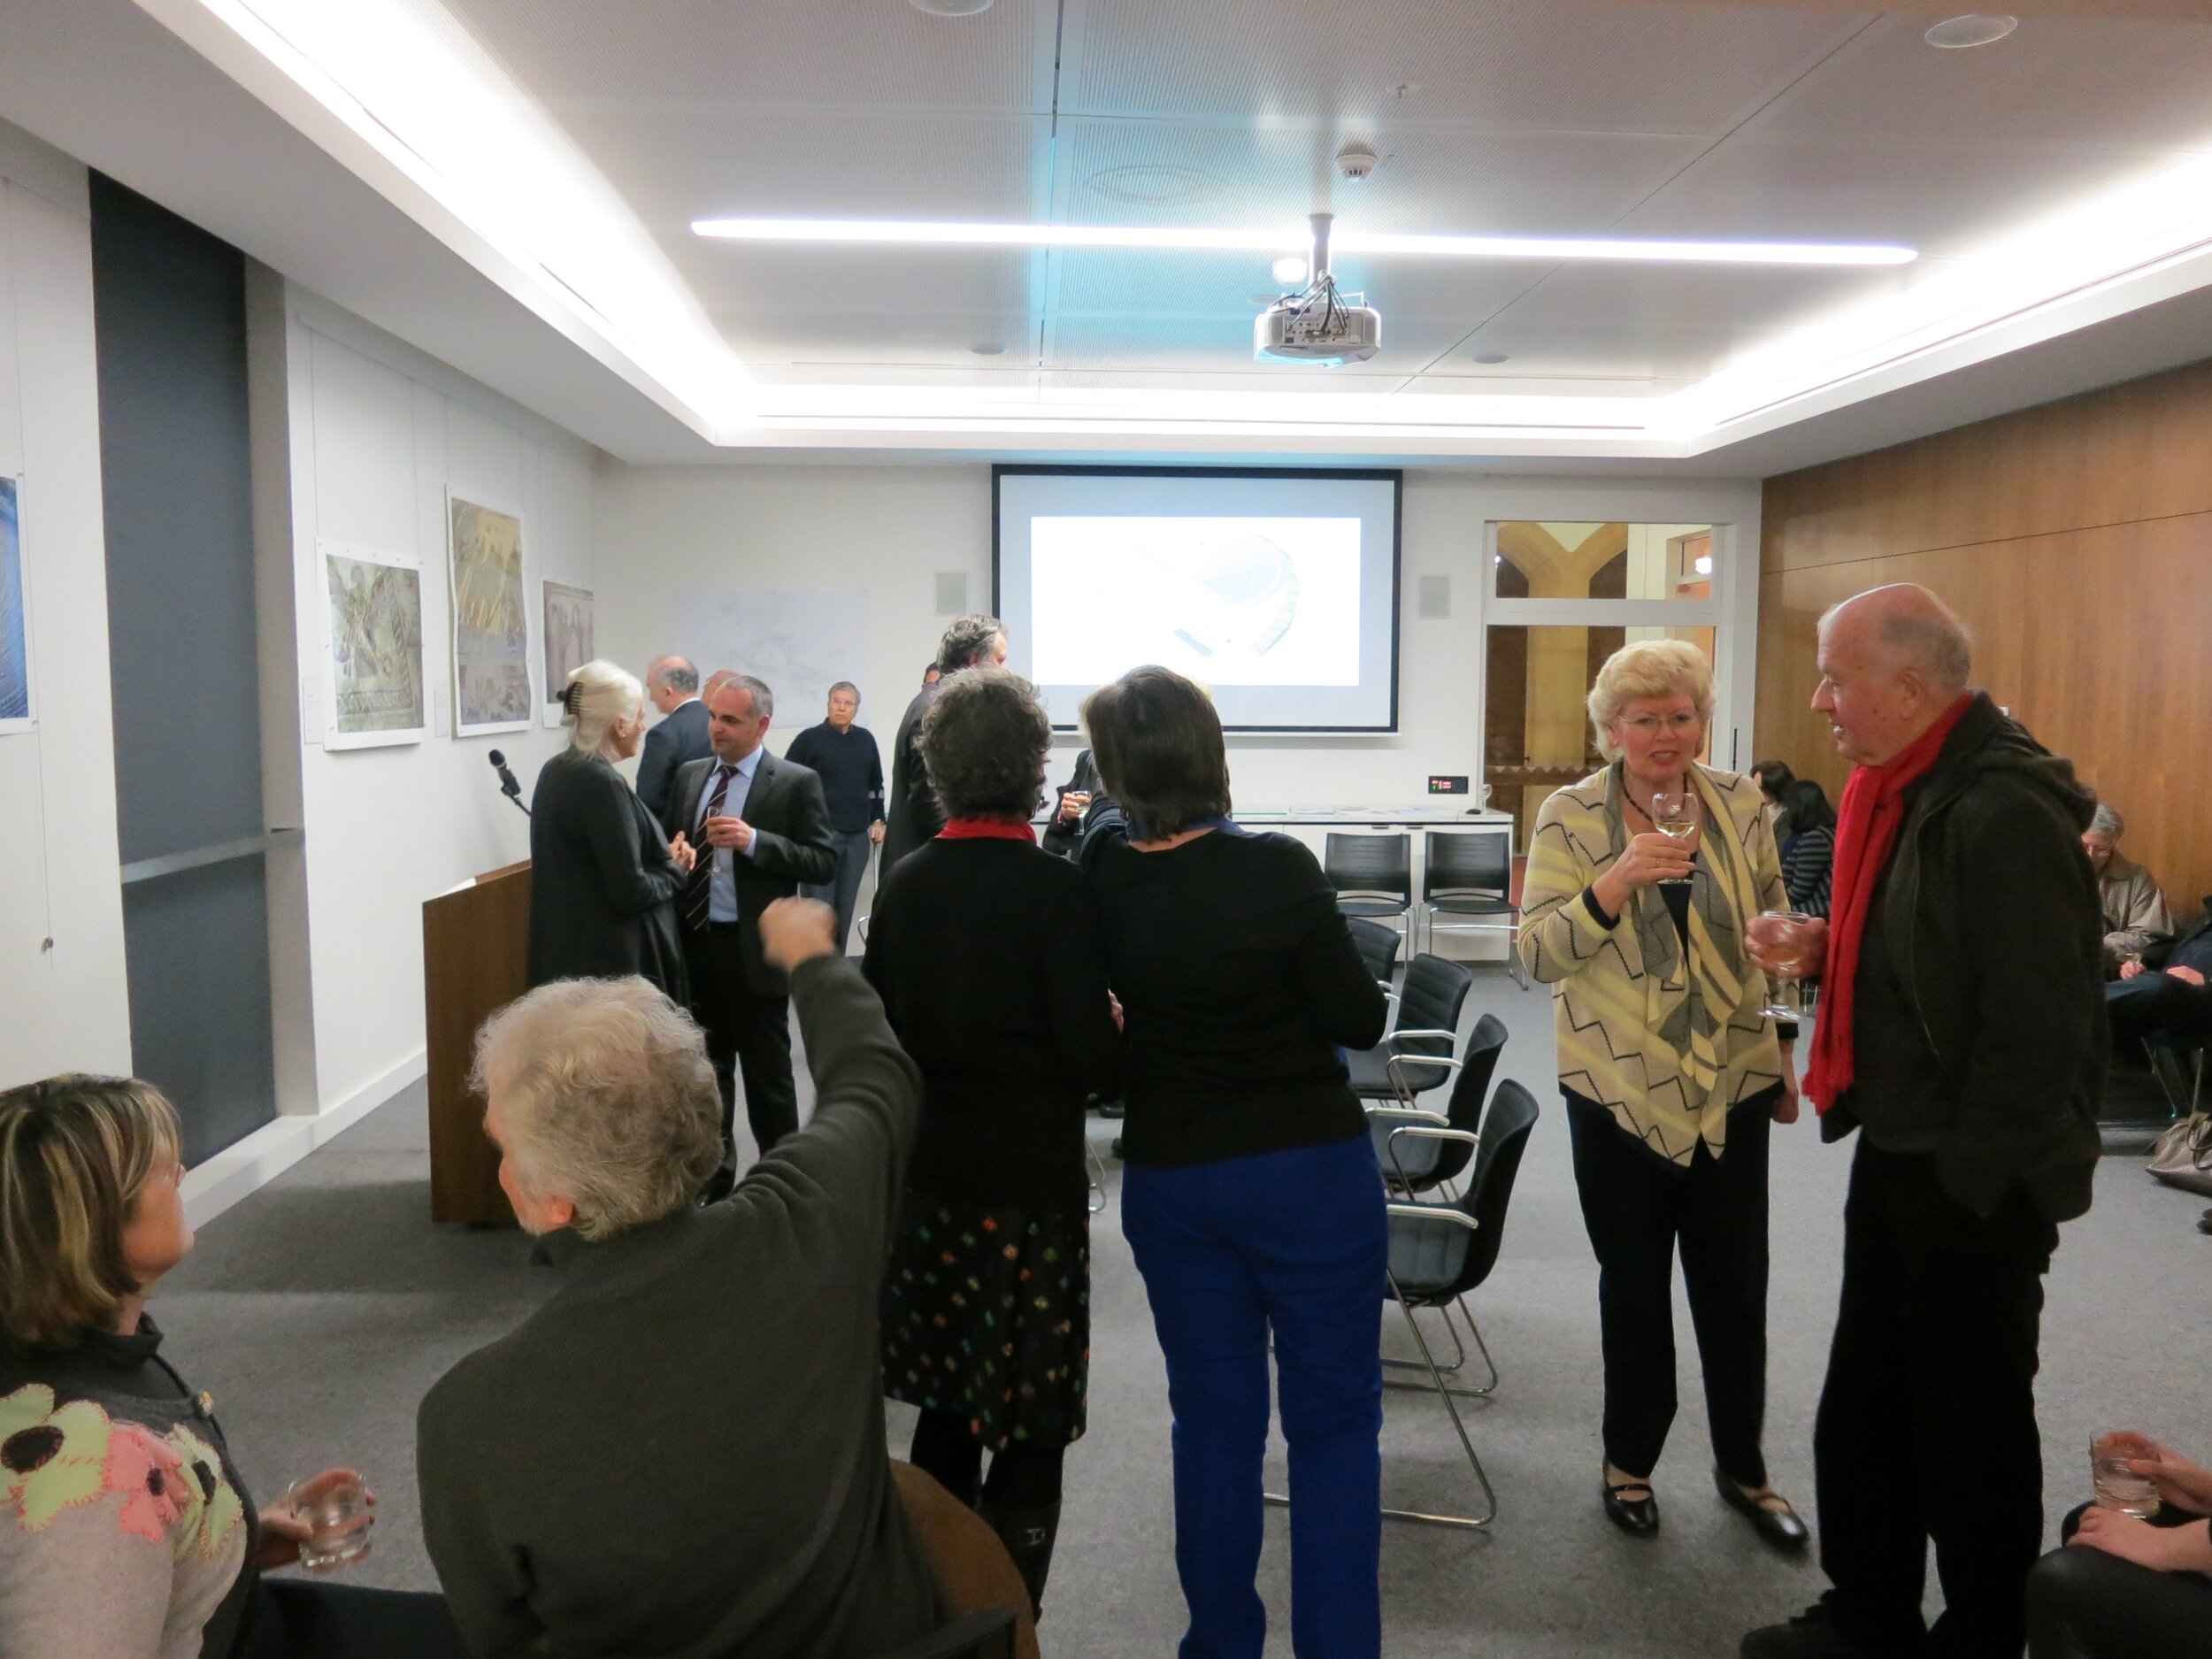  View of the opening of  Response to Cyprus,  10 July 2013, hosted by the Australian Archaeological Institute at Athens (AAIA) at the Centre of Classical and Near Eastern Studies of Australia (CCANESA). Photo: Courtesy of the AAIA. 